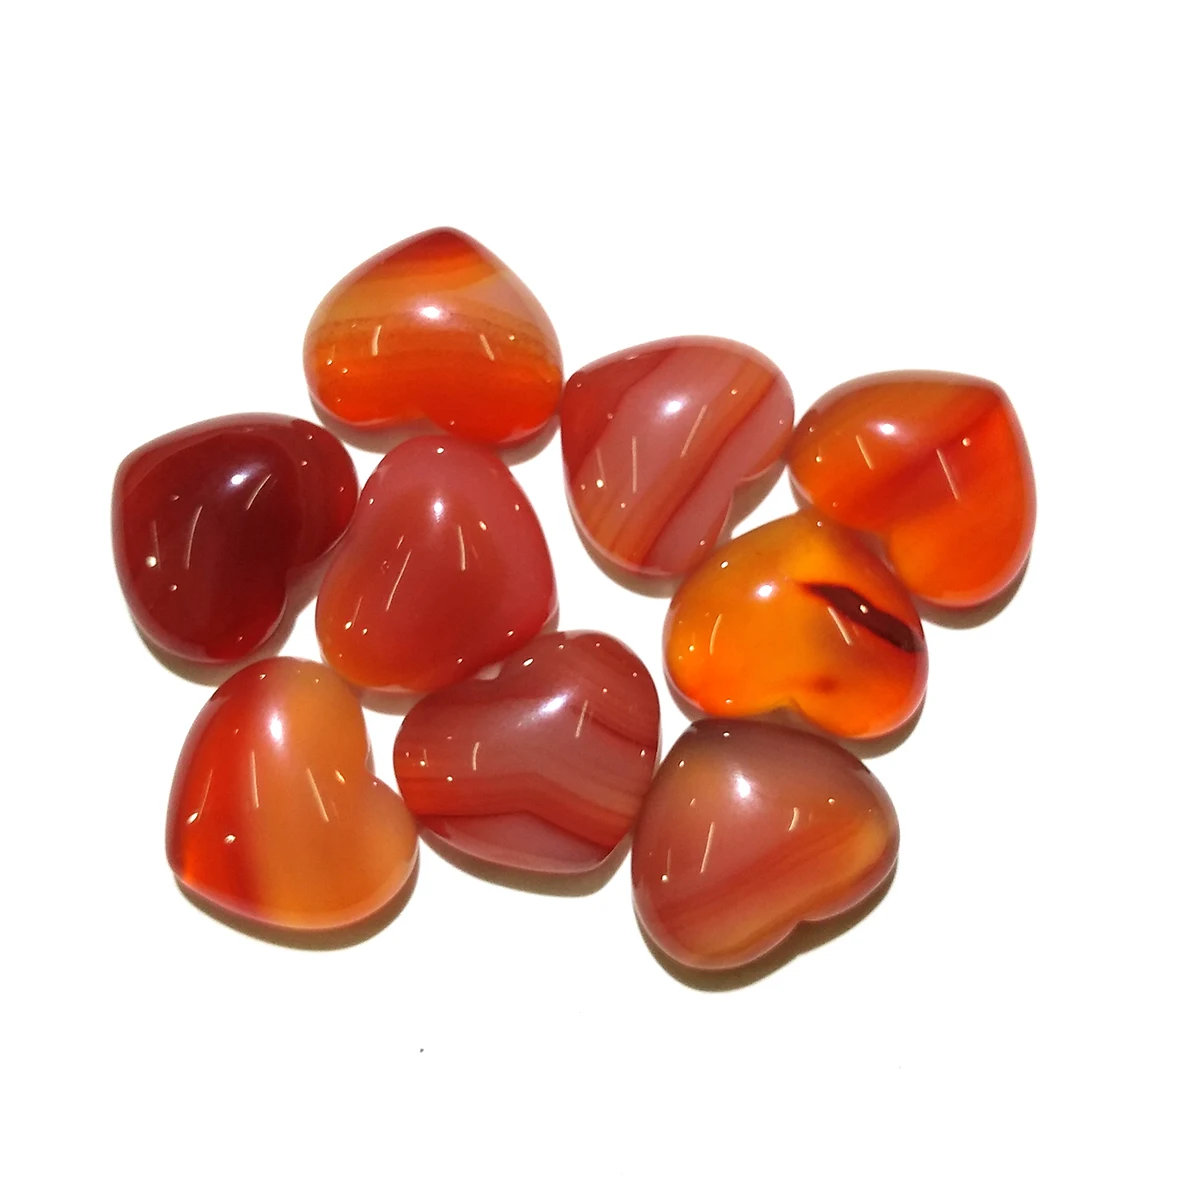 

Natural Stone Red Agates Cabochon Bead Flat Back Heart Shape No Hole Loose Beads For jewelry making DIY Ring Necklace accessorie